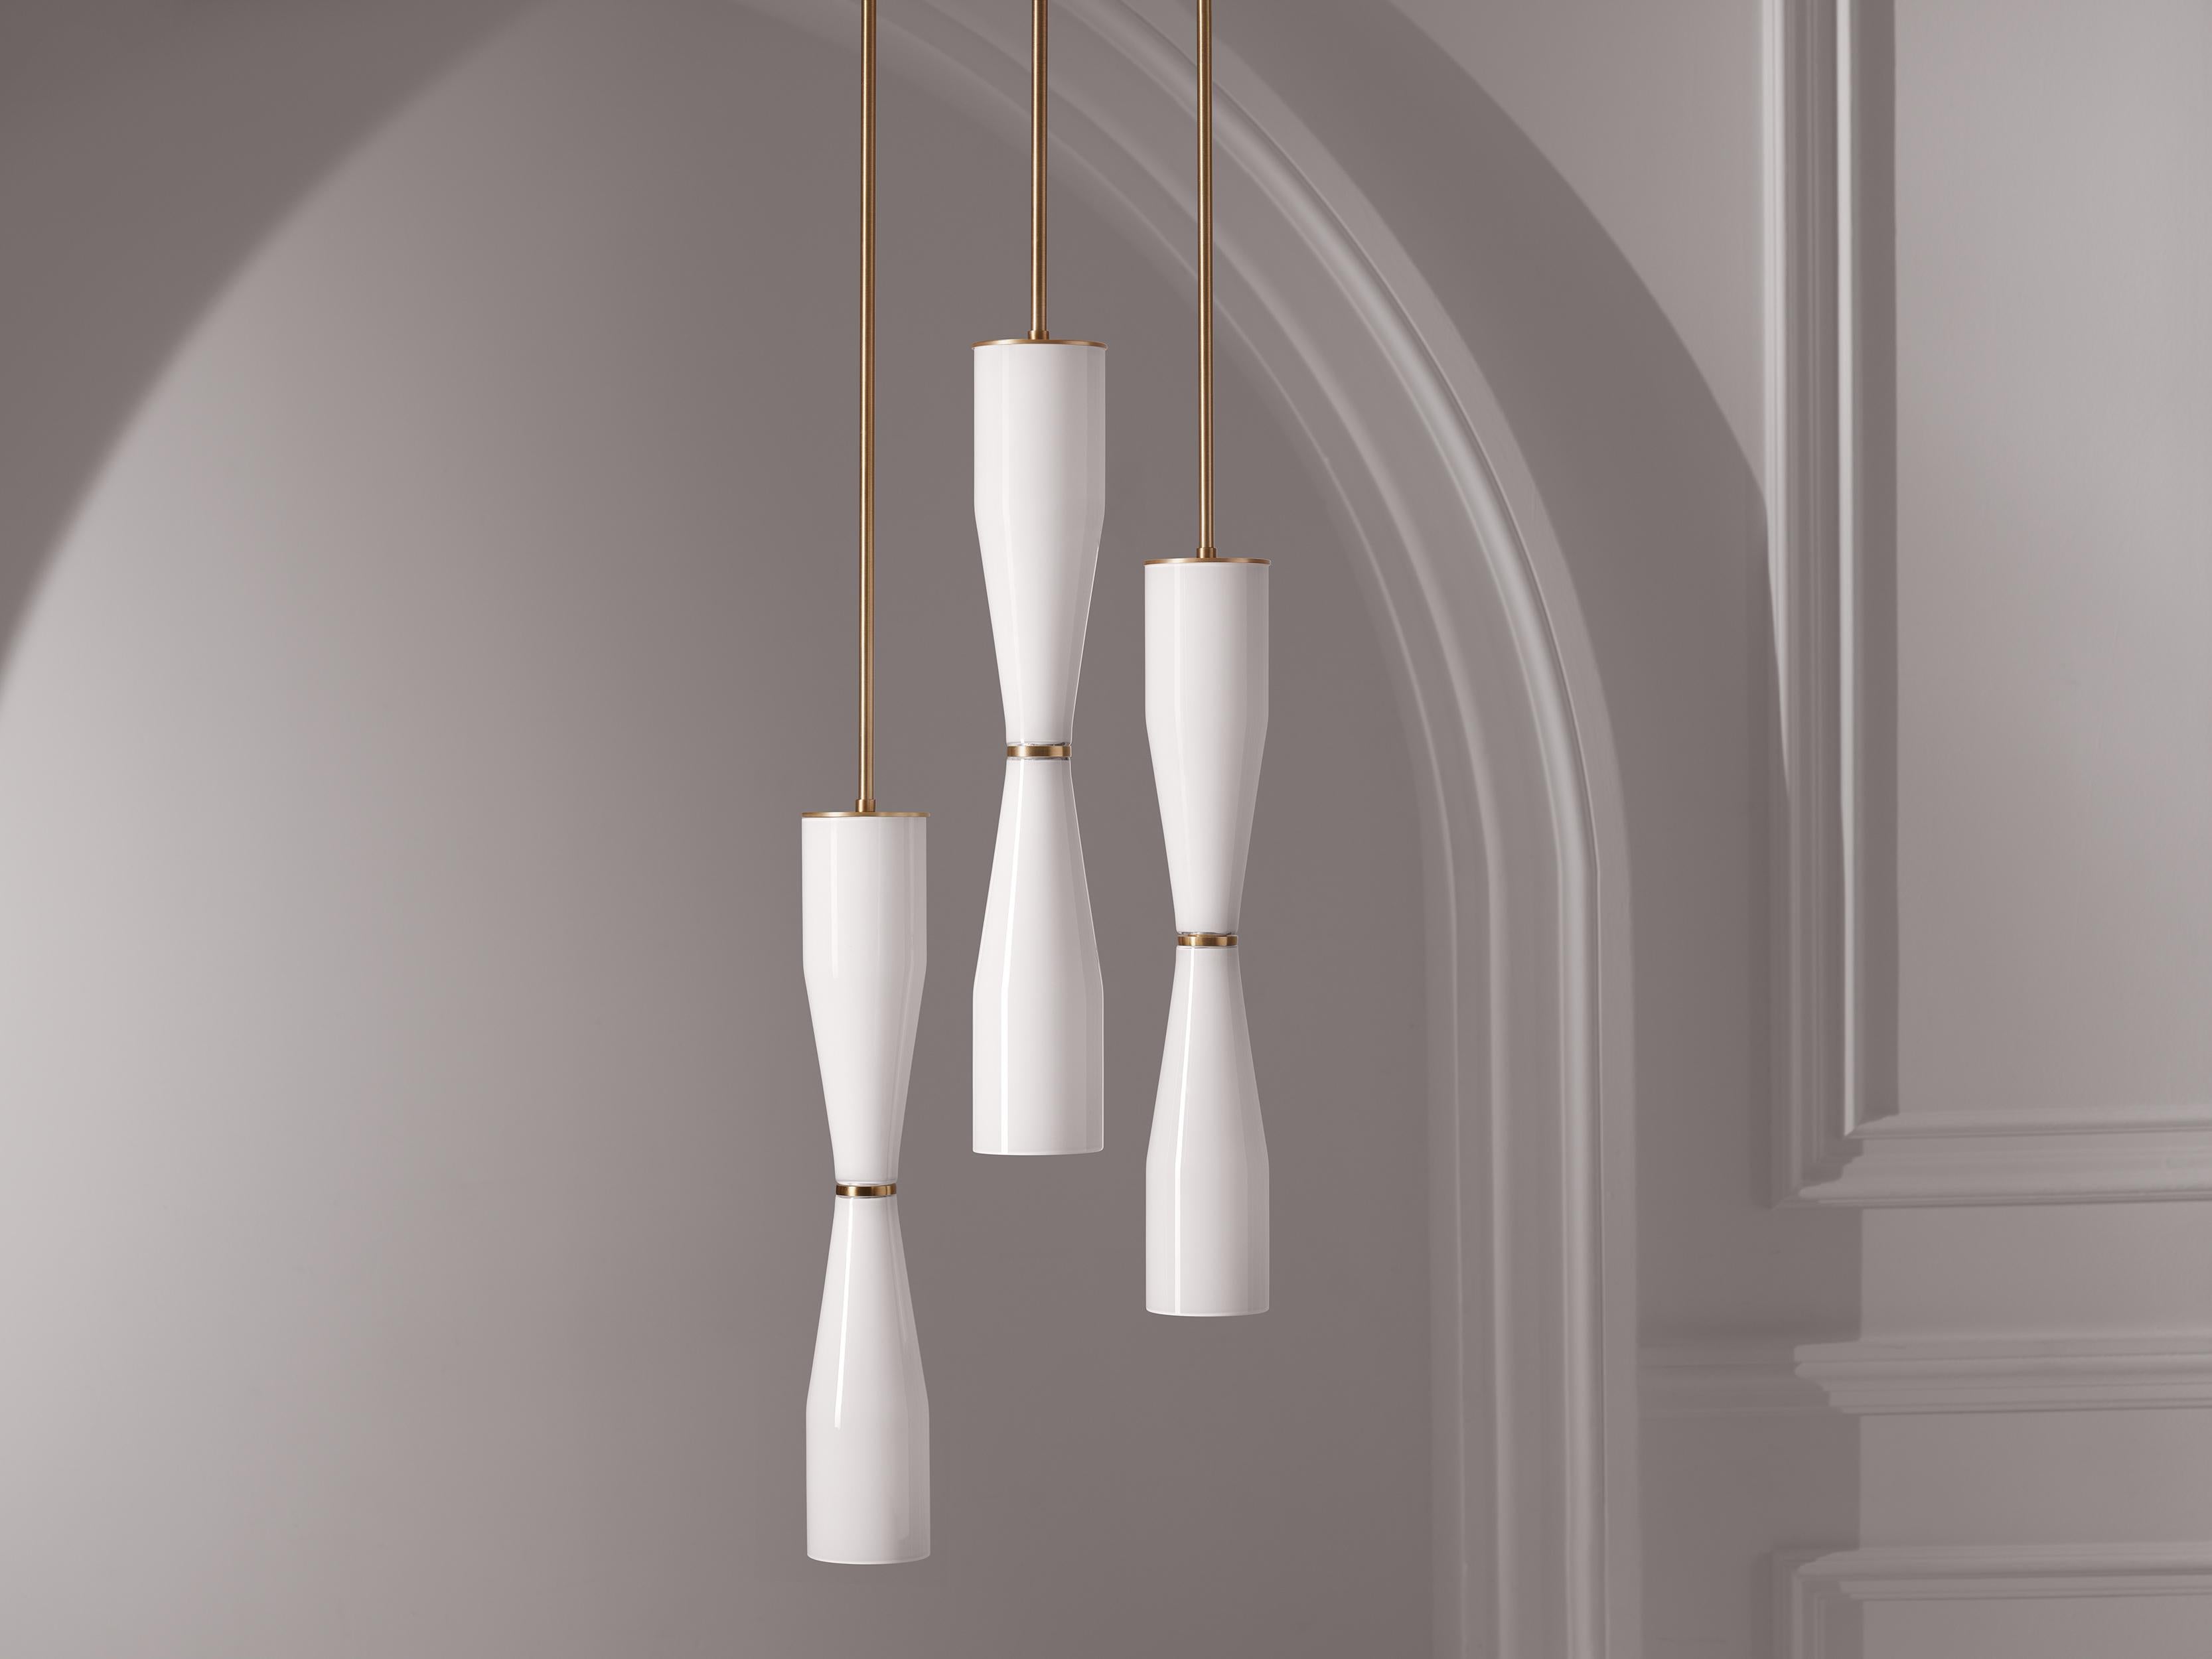 The Etcetera Pendant balances the sculptural with the streamlined.  With an organic feel, the Etcetera Series uses design geometry to create pieces that are clean-lined yet natural. 

Entirely hand-made in Canada, Etcetera uses a small palette of